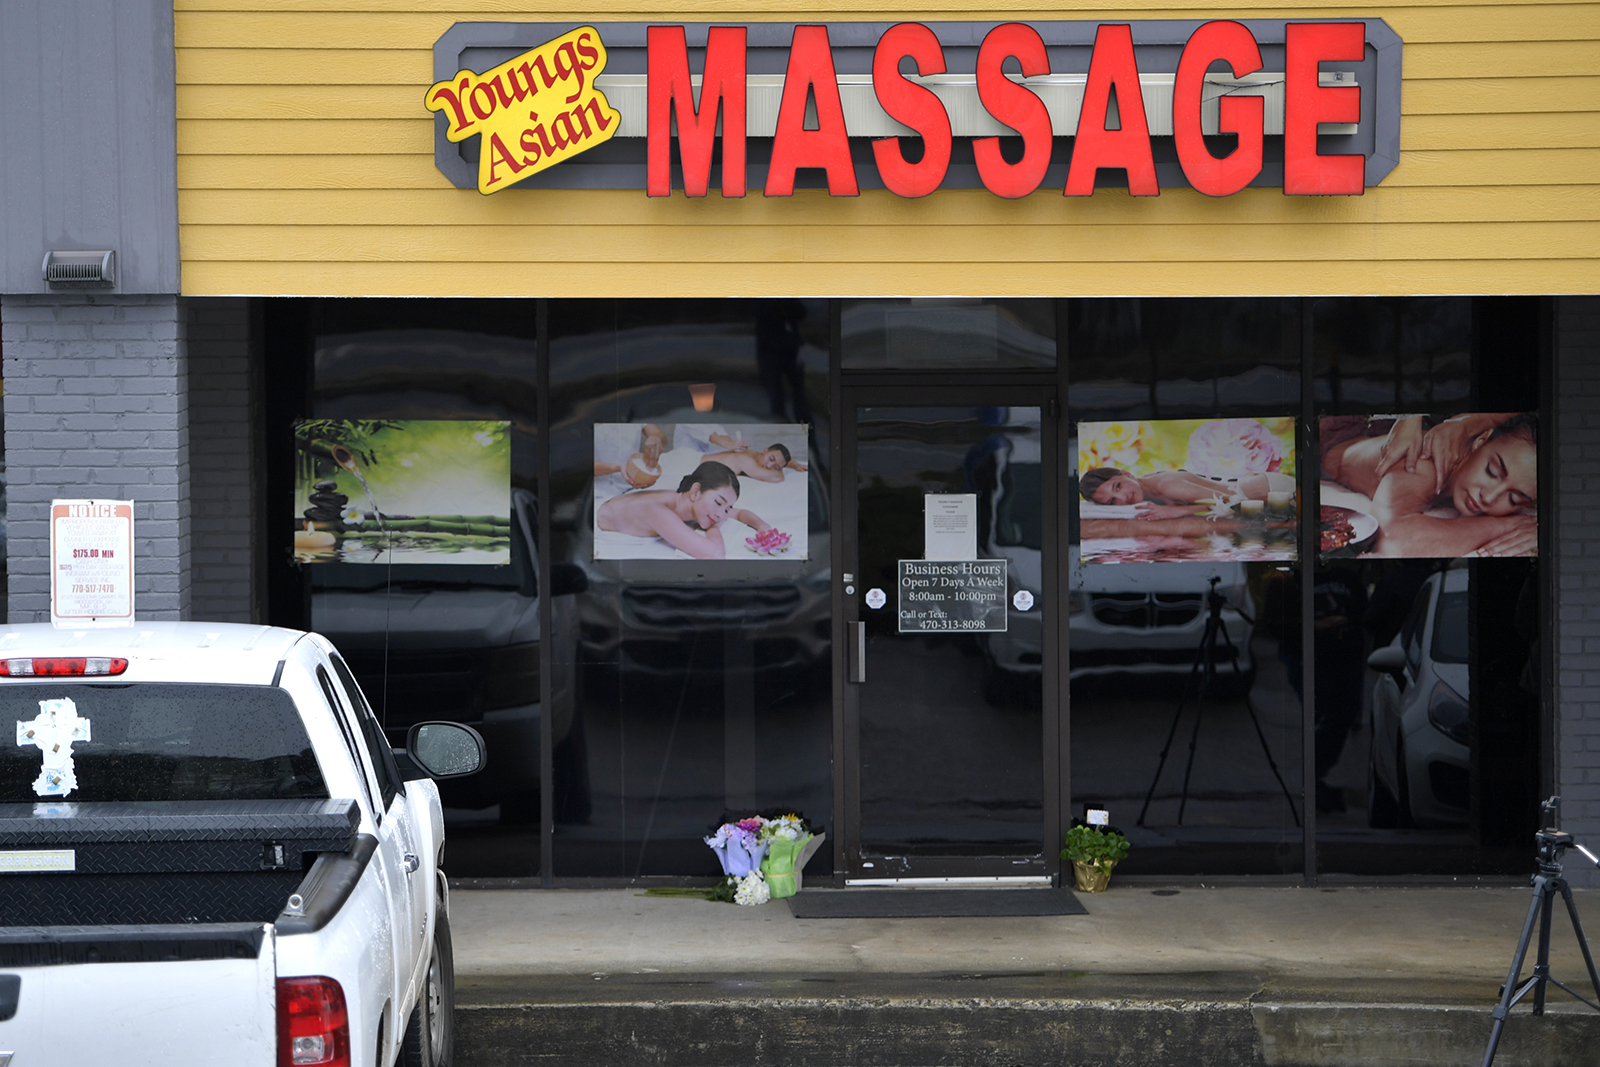 A makeshift memorial is seen outside a business where a multiple fatal shooting occurred on Tuesday, March 16, 2021, in Acworth, Ga. Robert Aaron Long, a white man, is accused of killing several people, most of whom were of Asian descent, at massage parlors in the Atlanta area. (AP Photo/Mike Stewart)